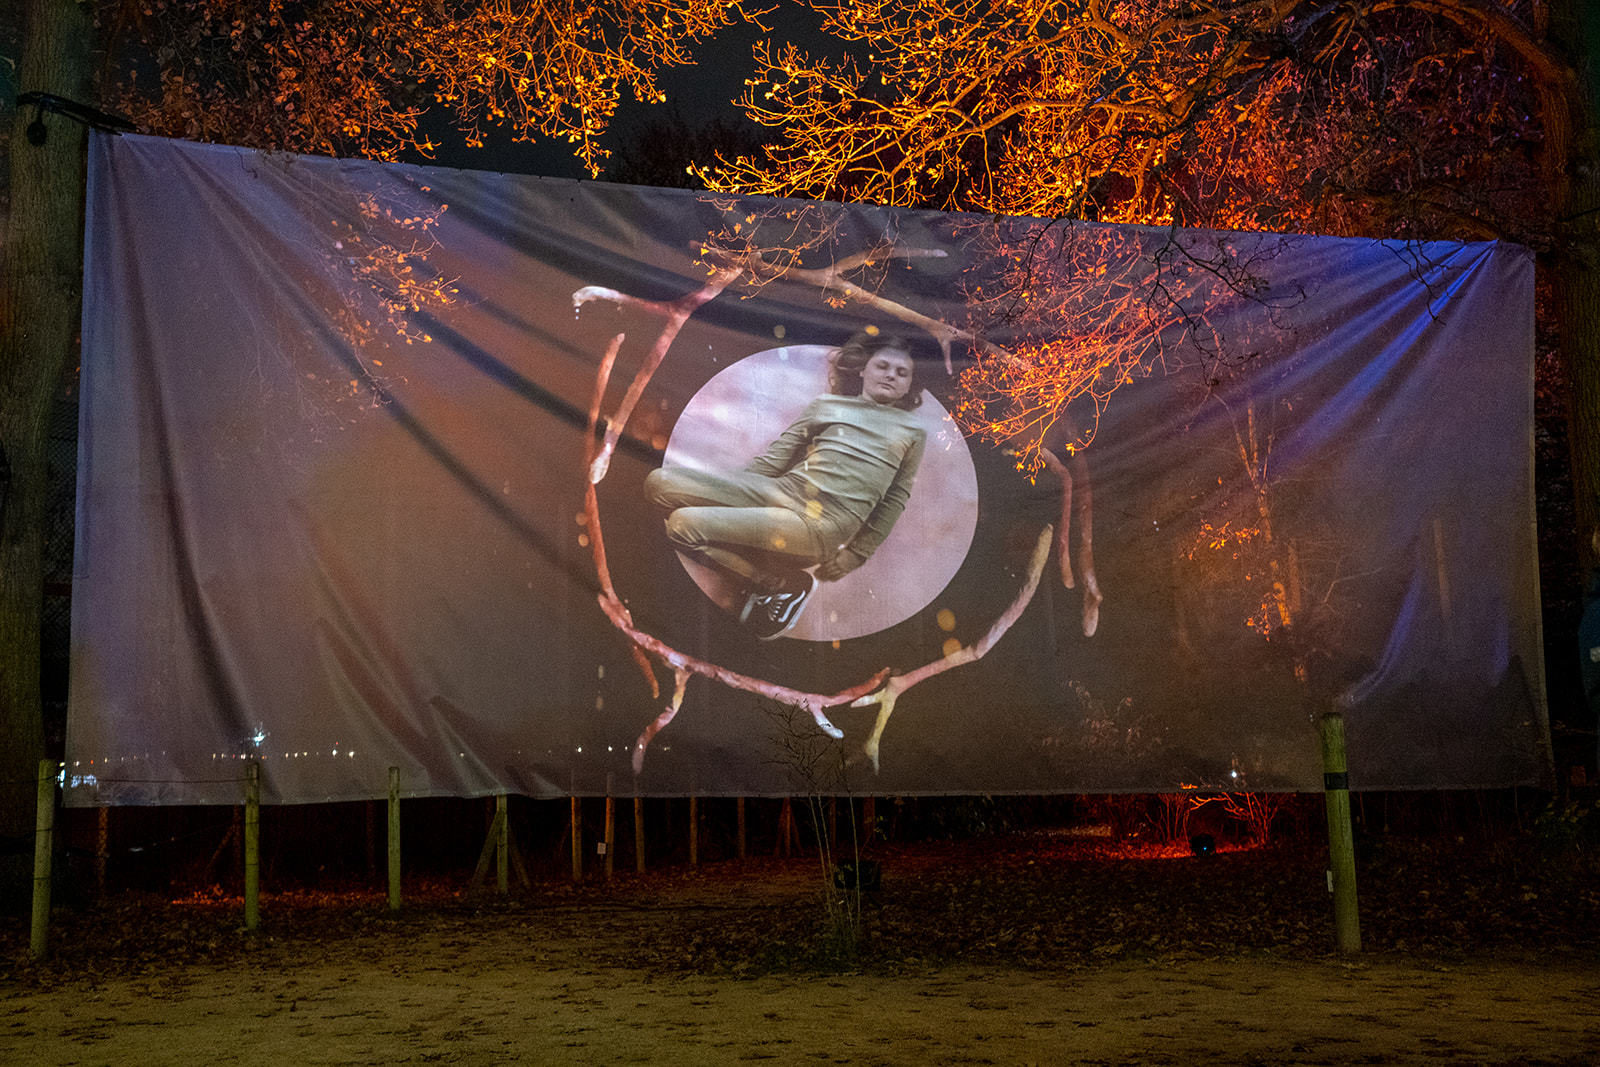 A large piece of fabric hangs between two trees. On it is an image of a girl projected. She is lying down with her eyes closed, a circle of antlers around her.